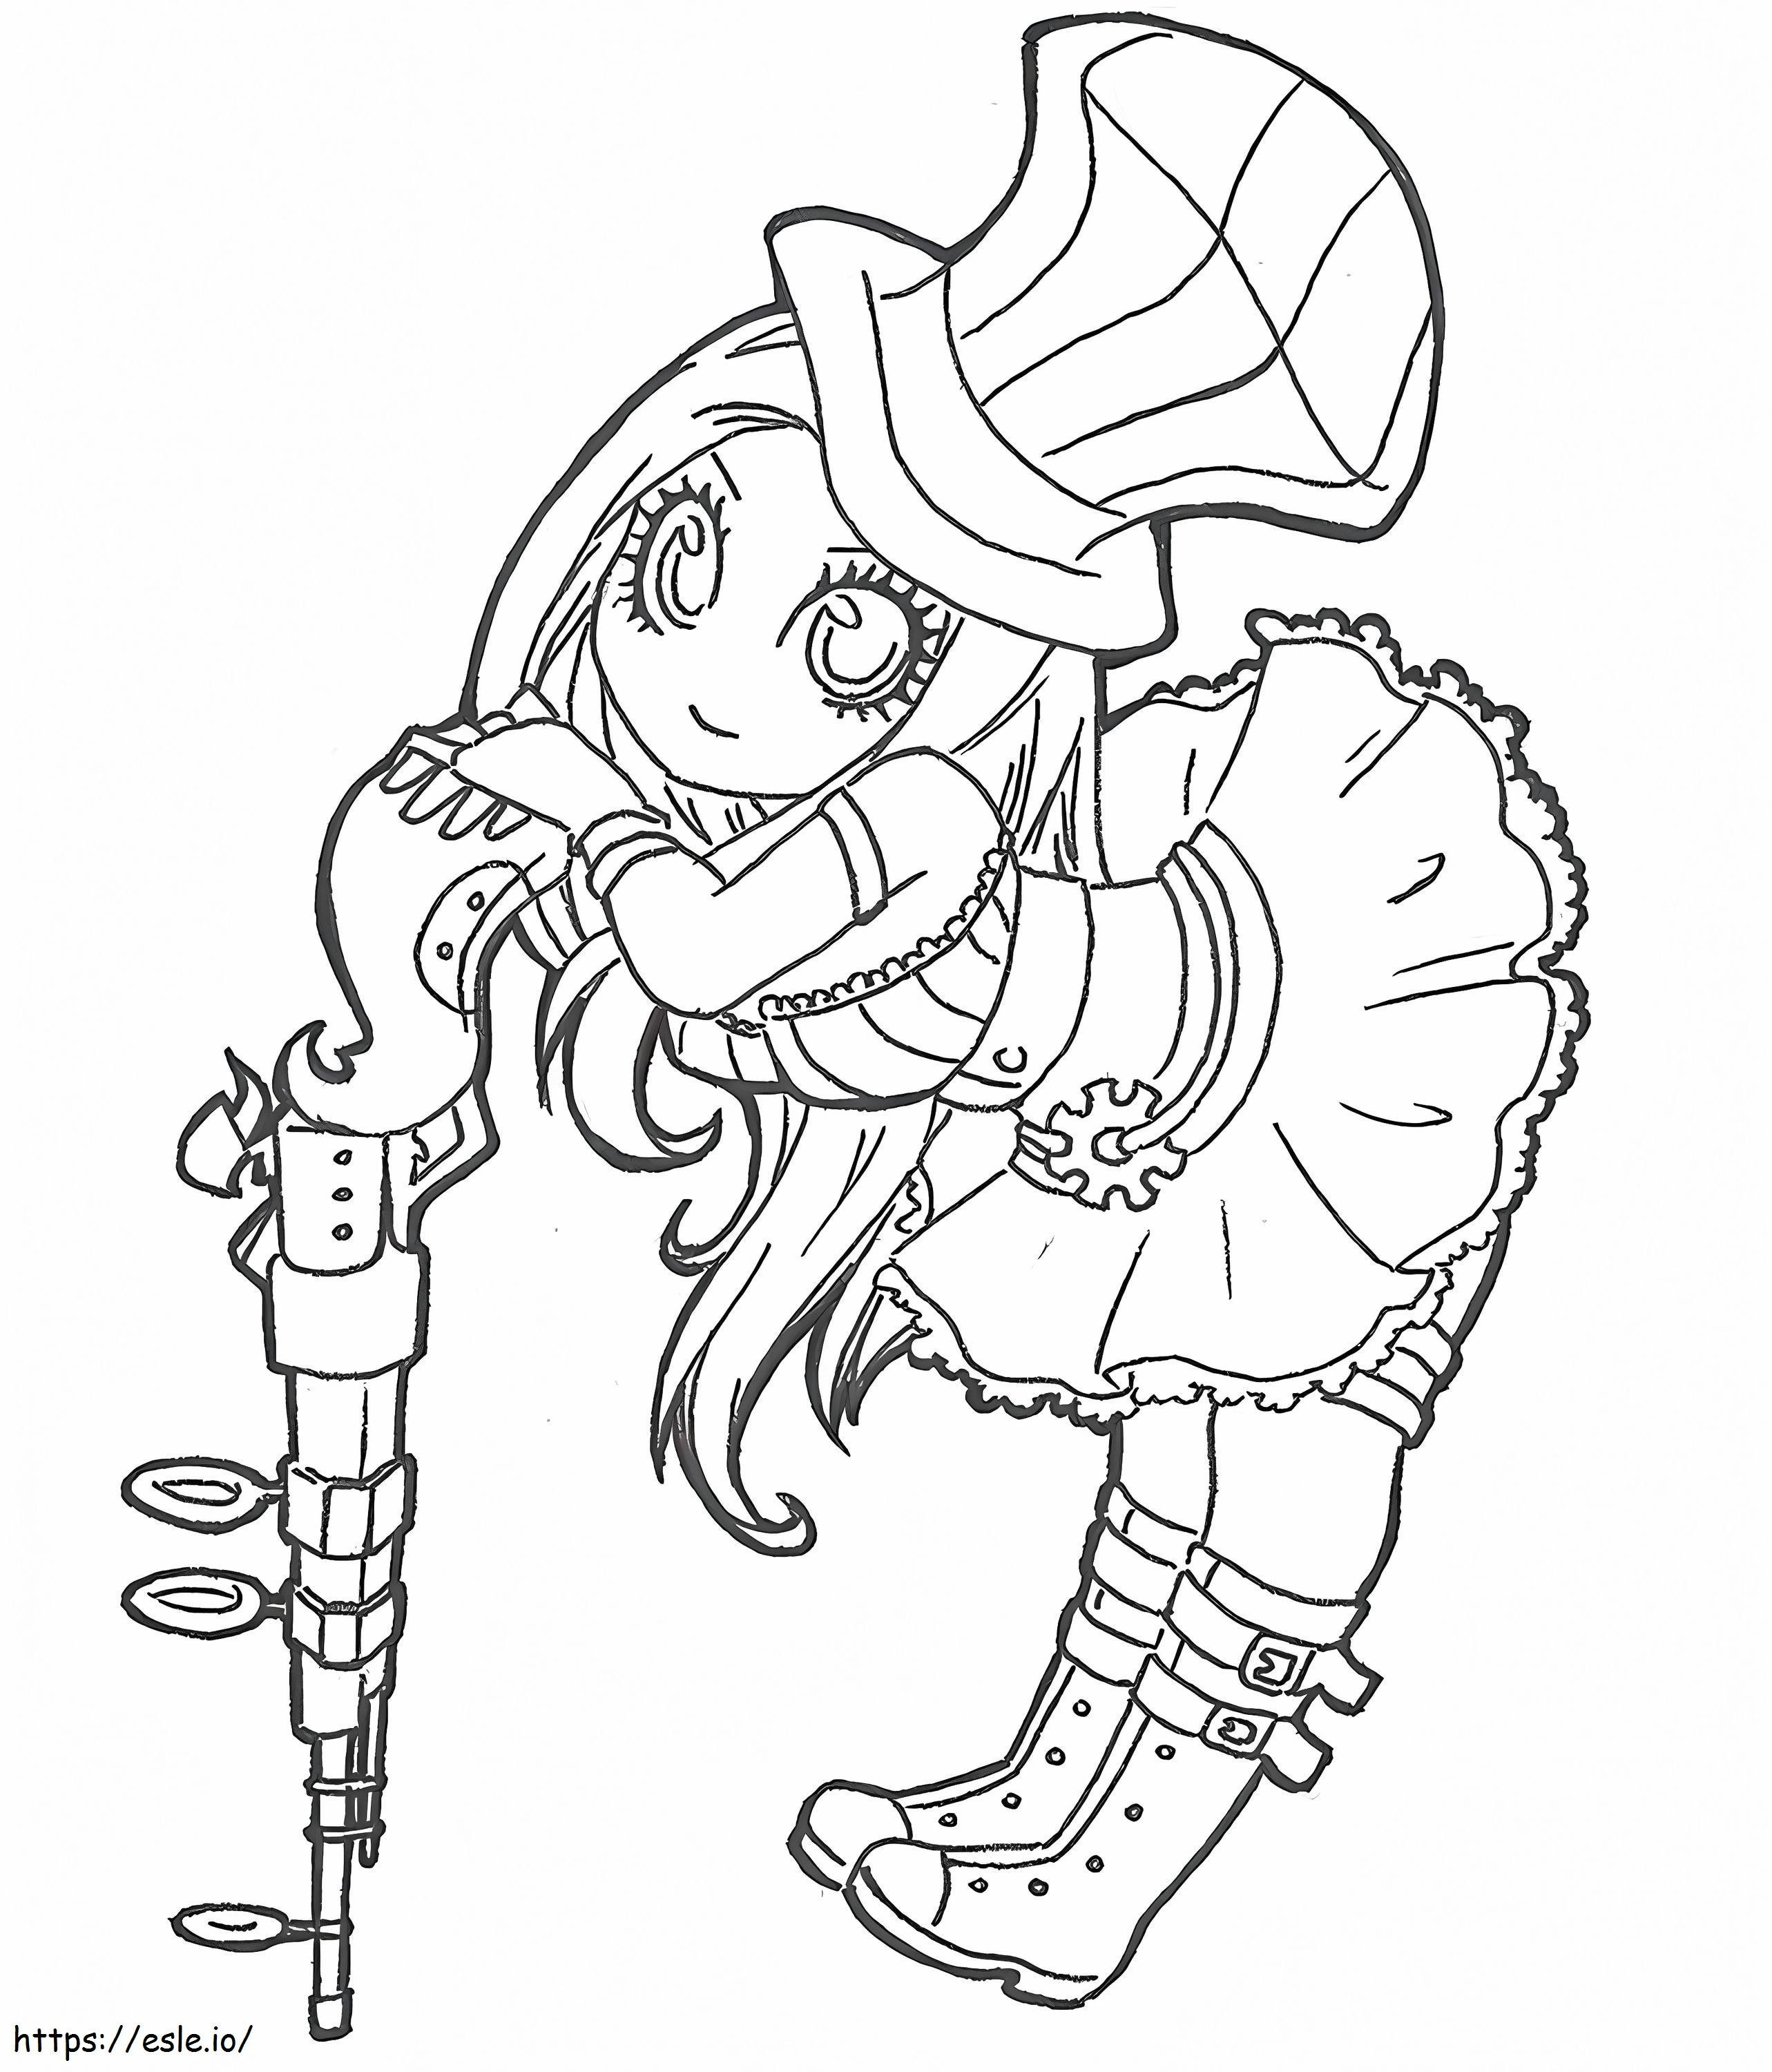 1560846916 Chibi Caitlyn A4 coloring page